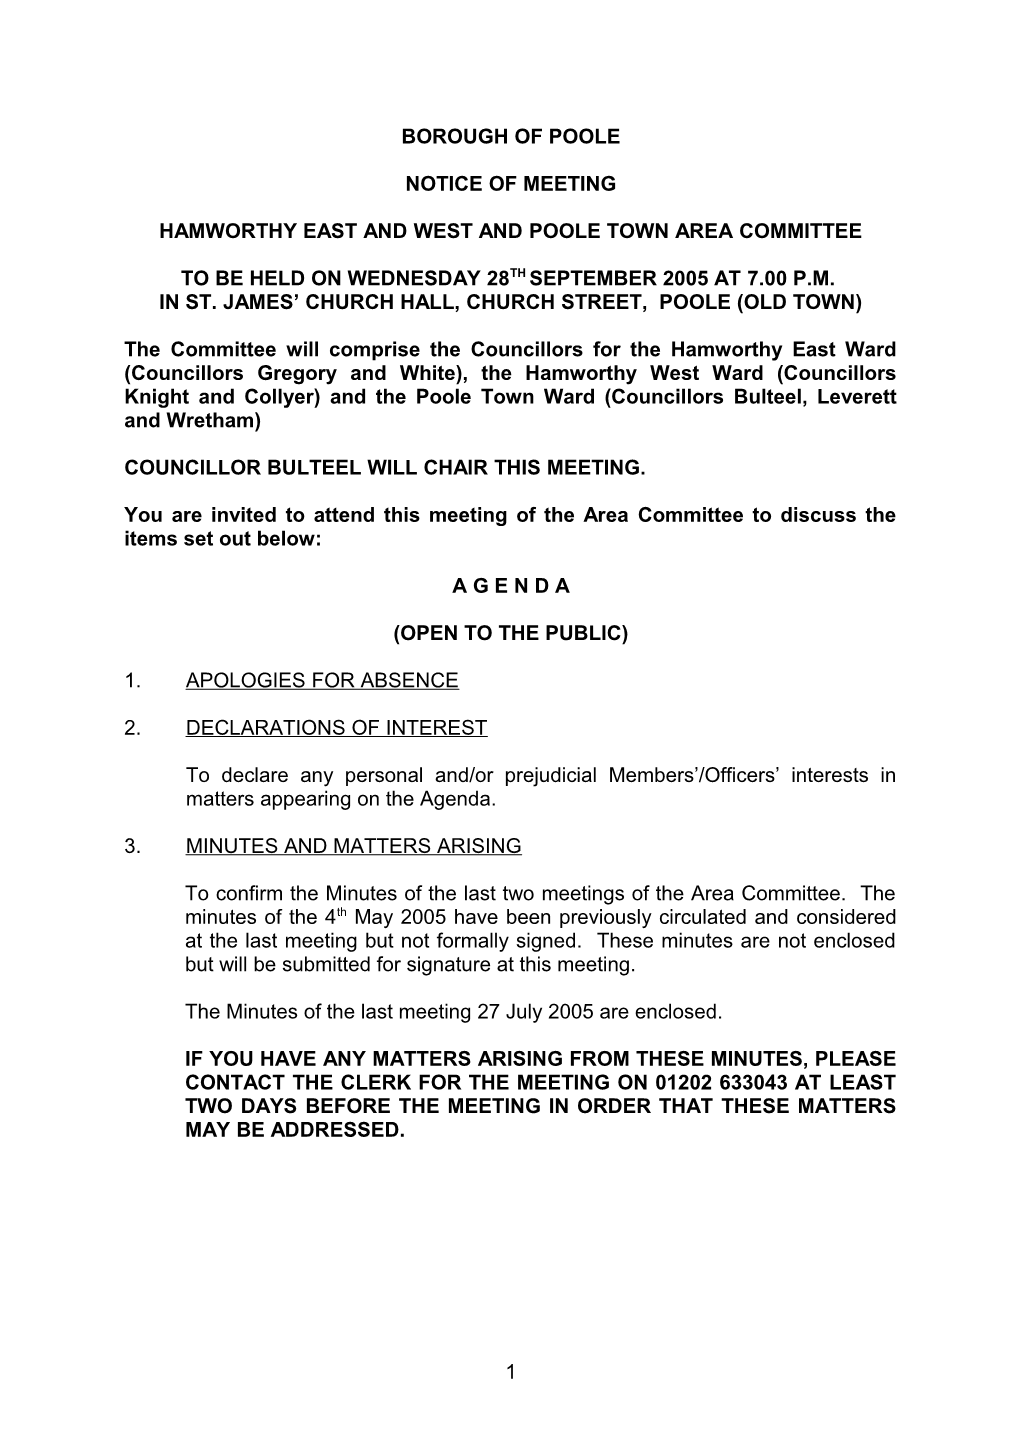 Agenda - Hamworthy East and West and Poole Town Area Committee - 28 September 2005